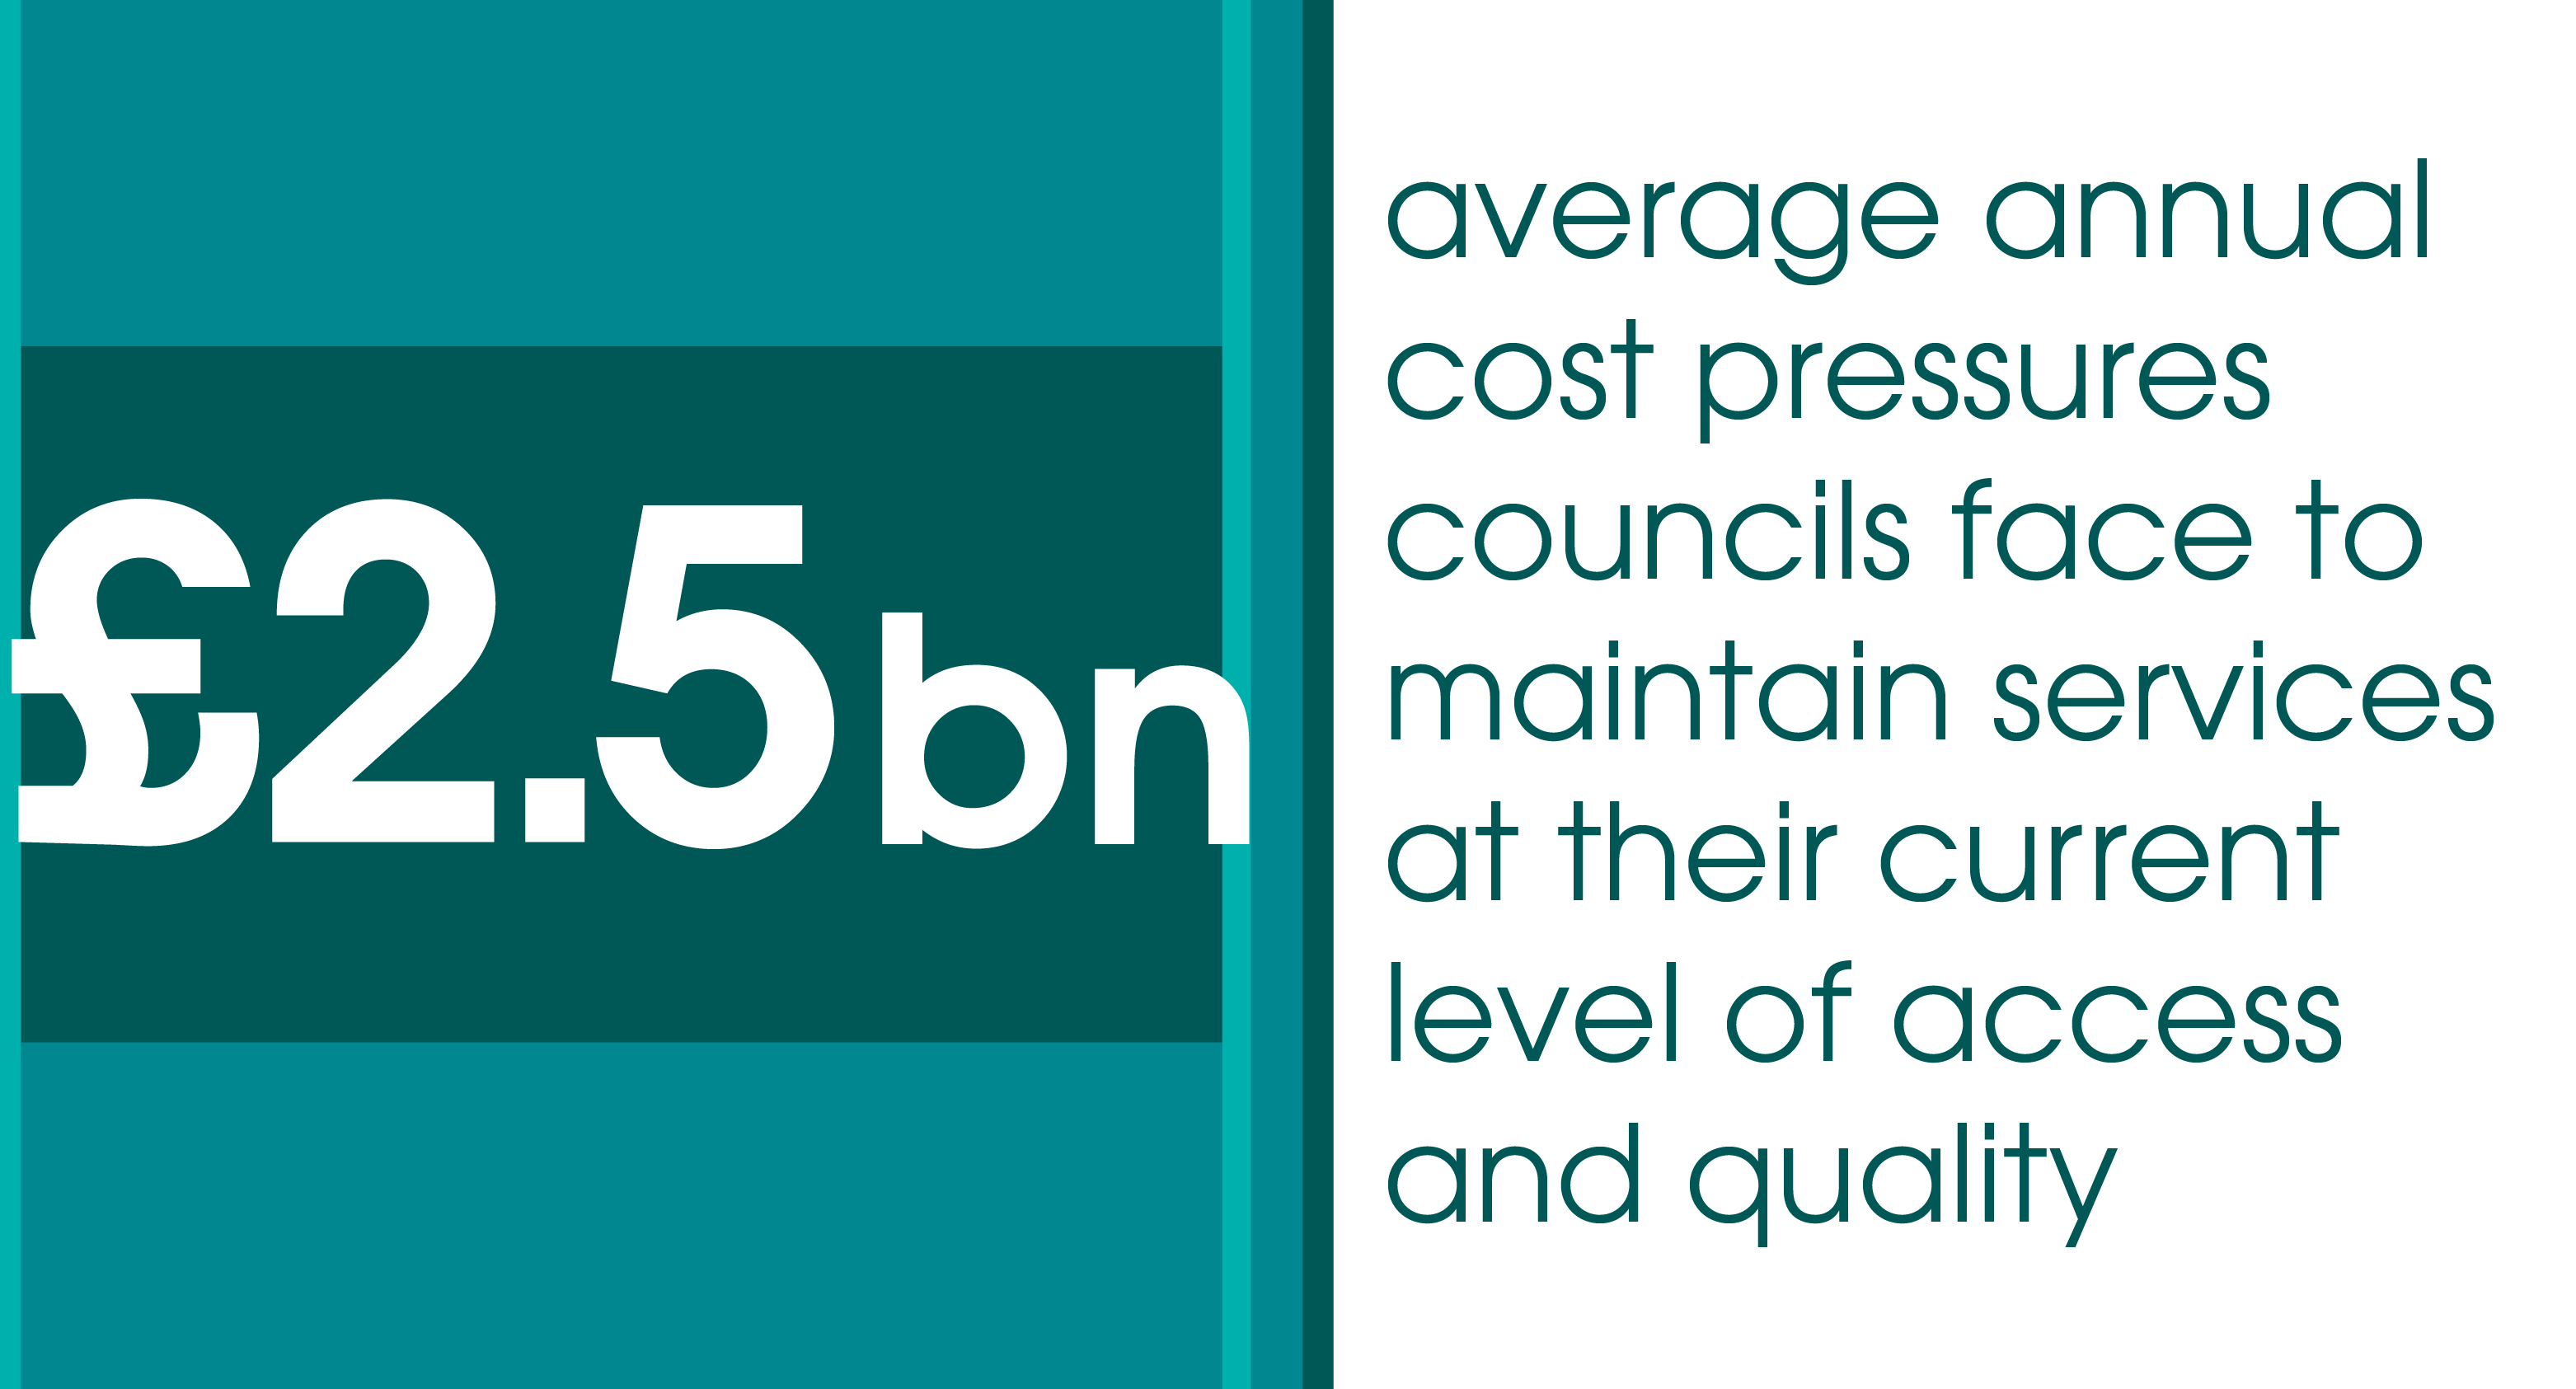 £2.5bn – average annual cost pressures councils face to maintain services at their current level of access and quality.